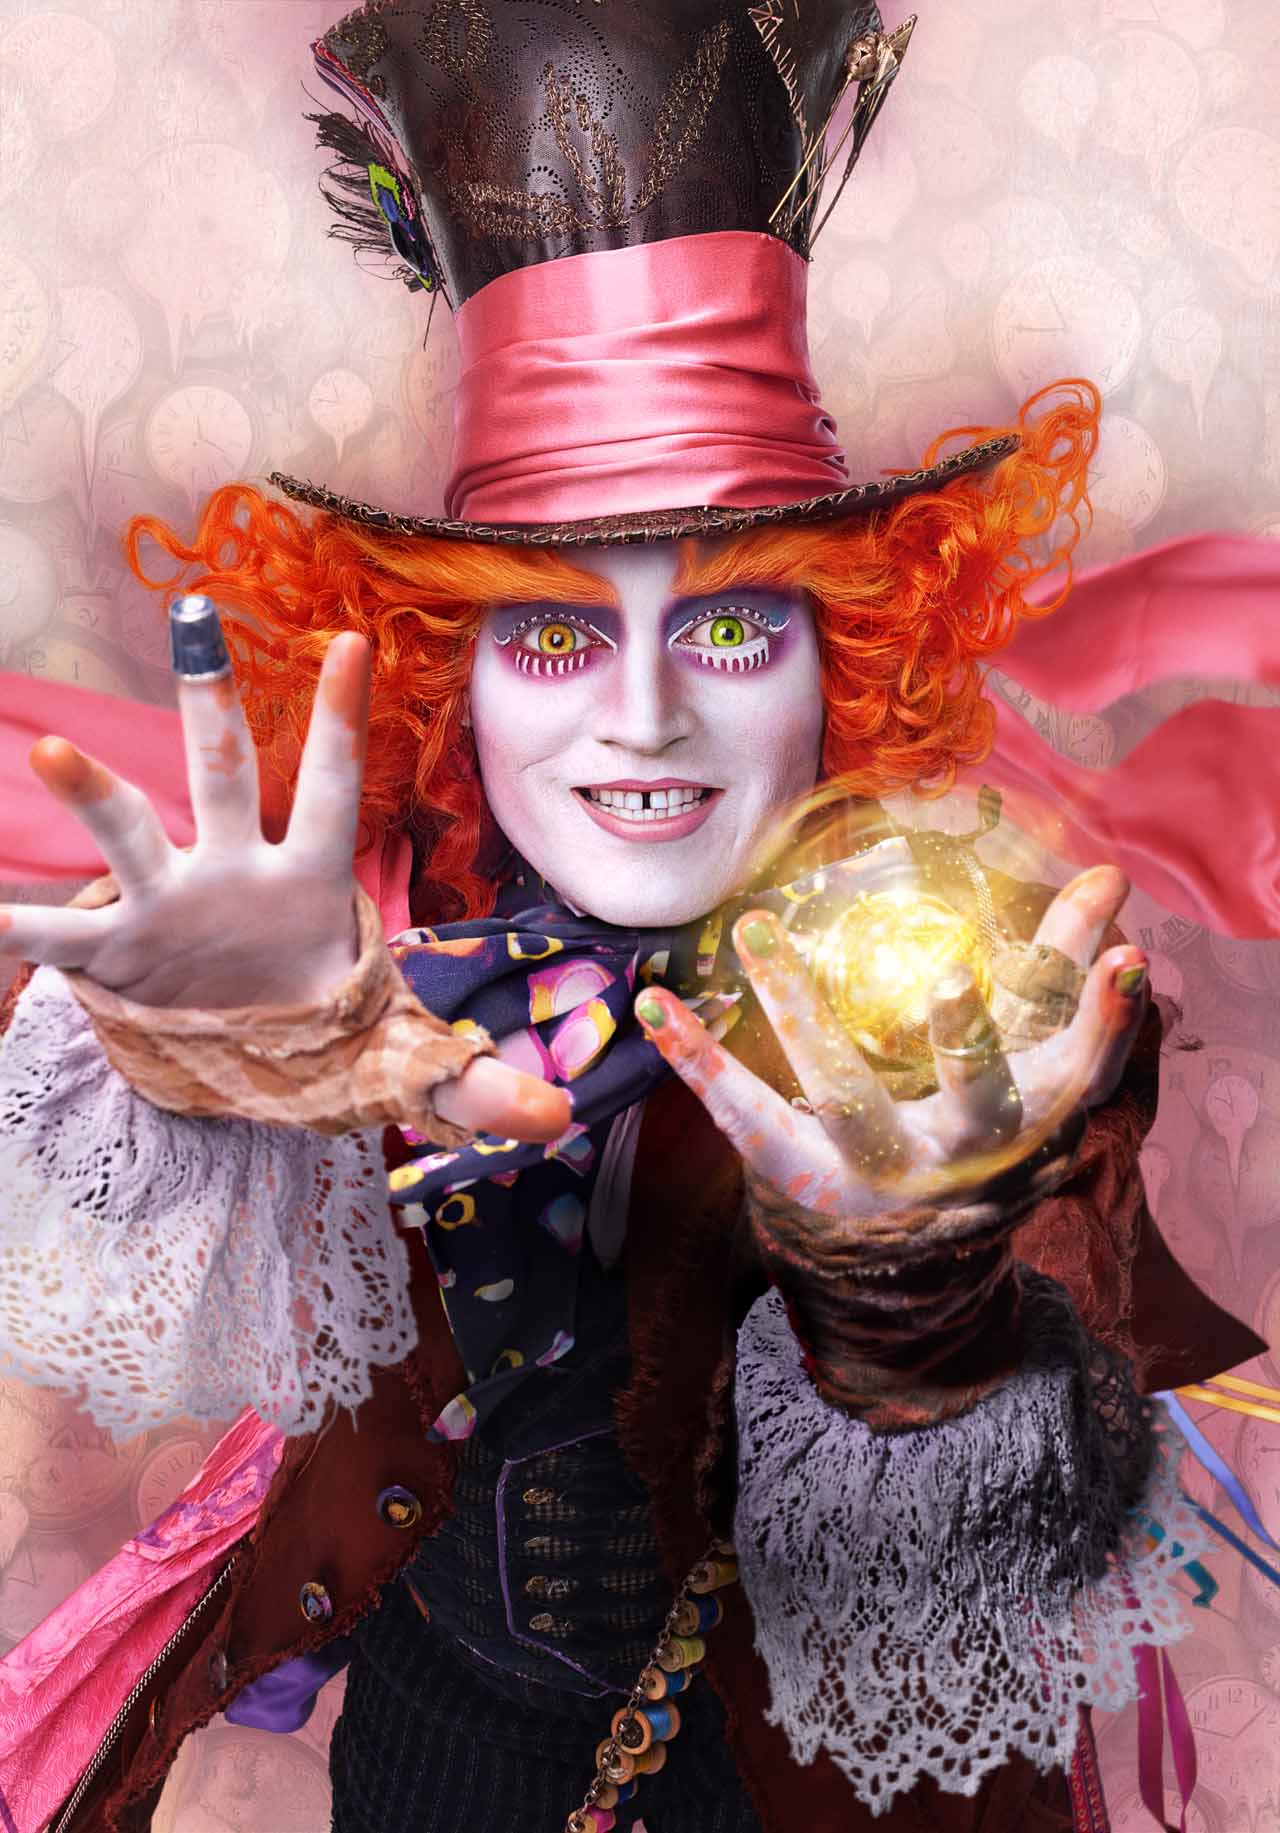 Alice Through The Looking Glass (2016) HD wallpapers, Desktop wallpaper - most viewed